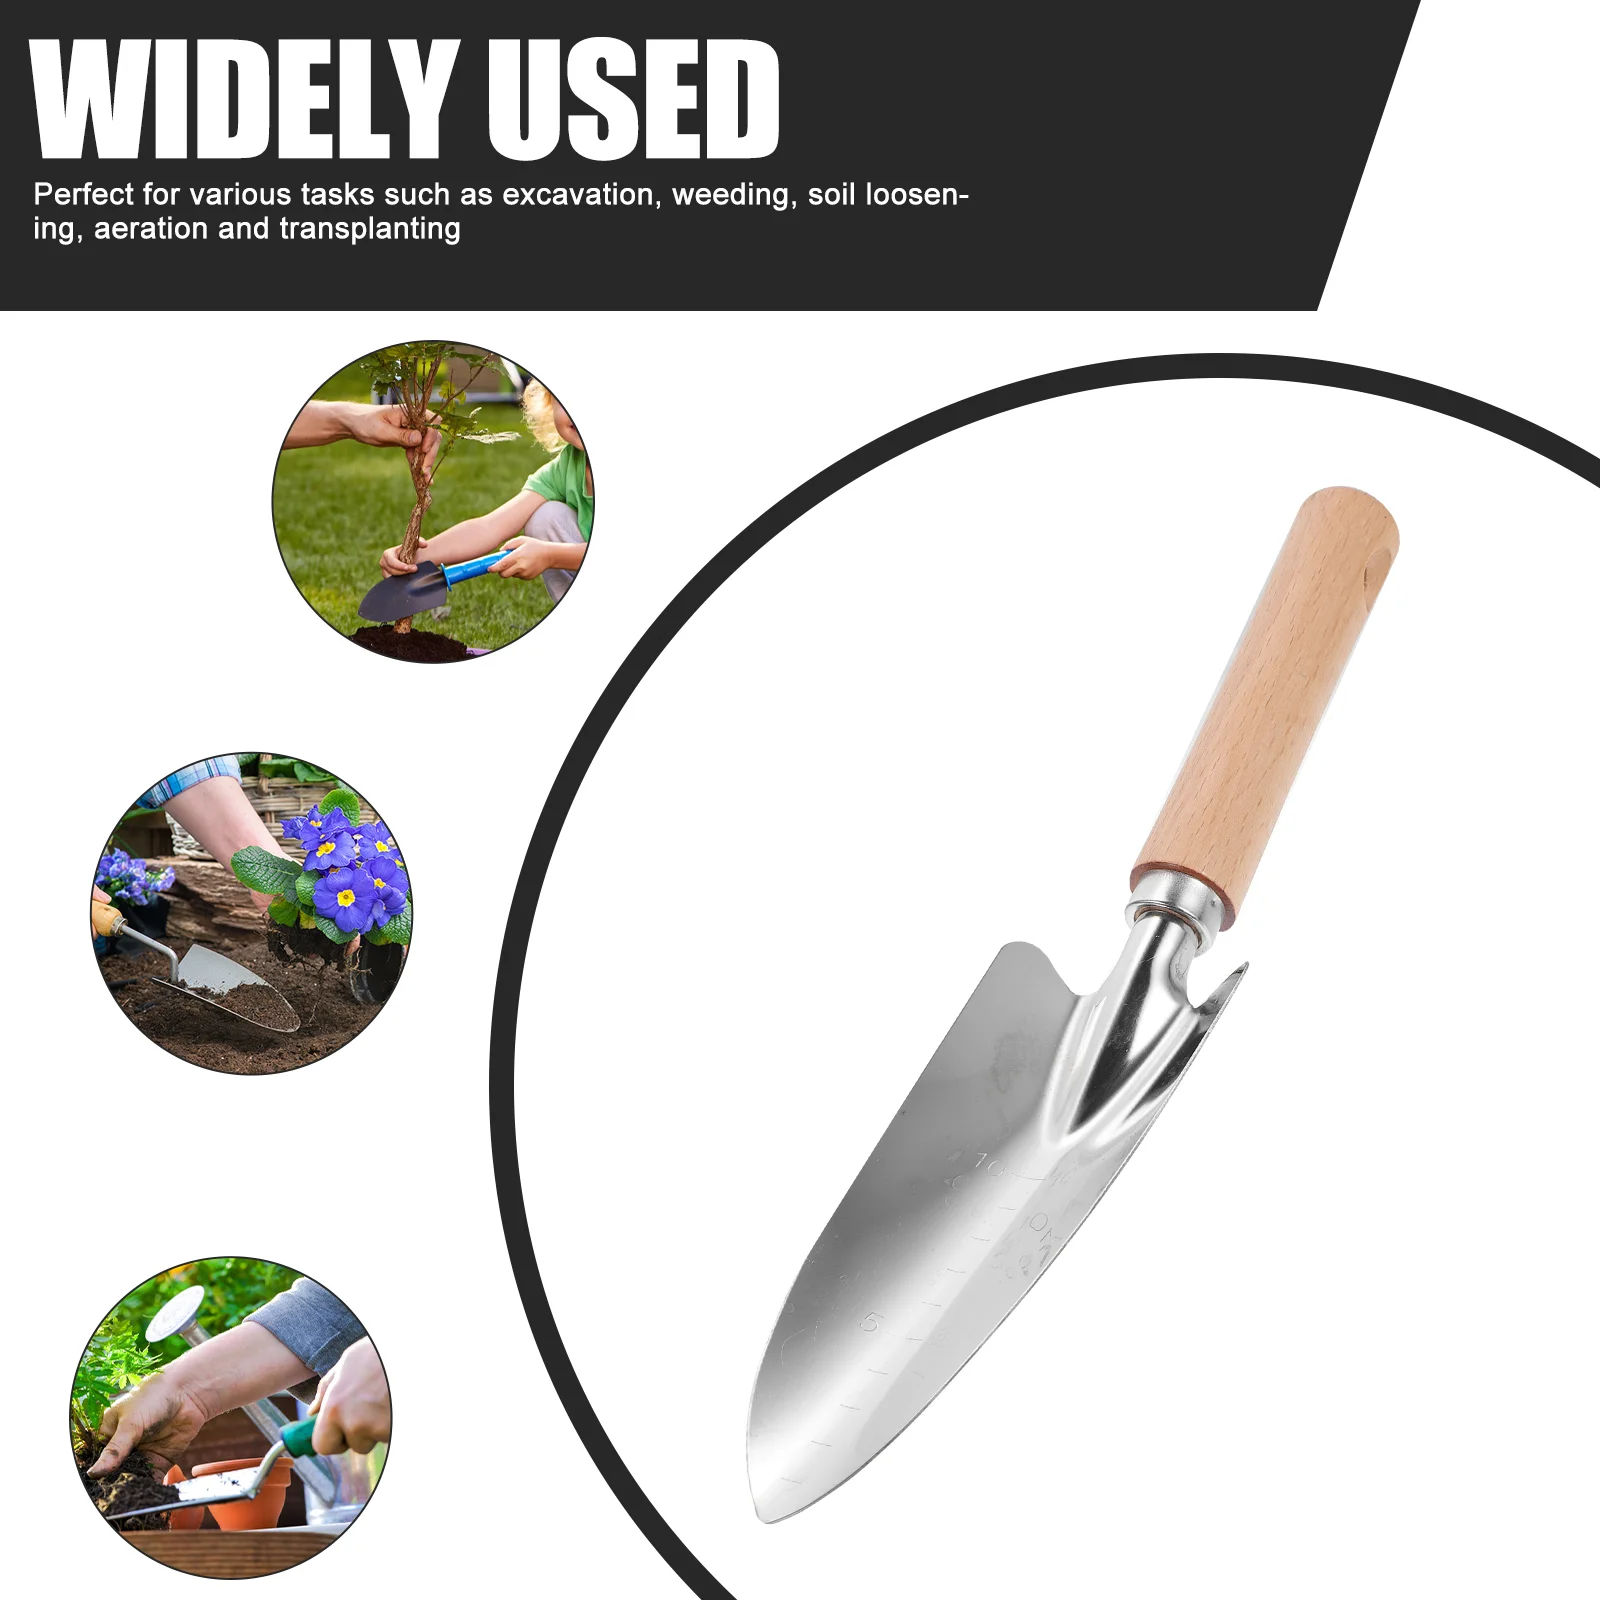 

2 Pcs Outdoor Tools Weeding Trowel Manual Cultivator Hand Trowels Garden Planting Child